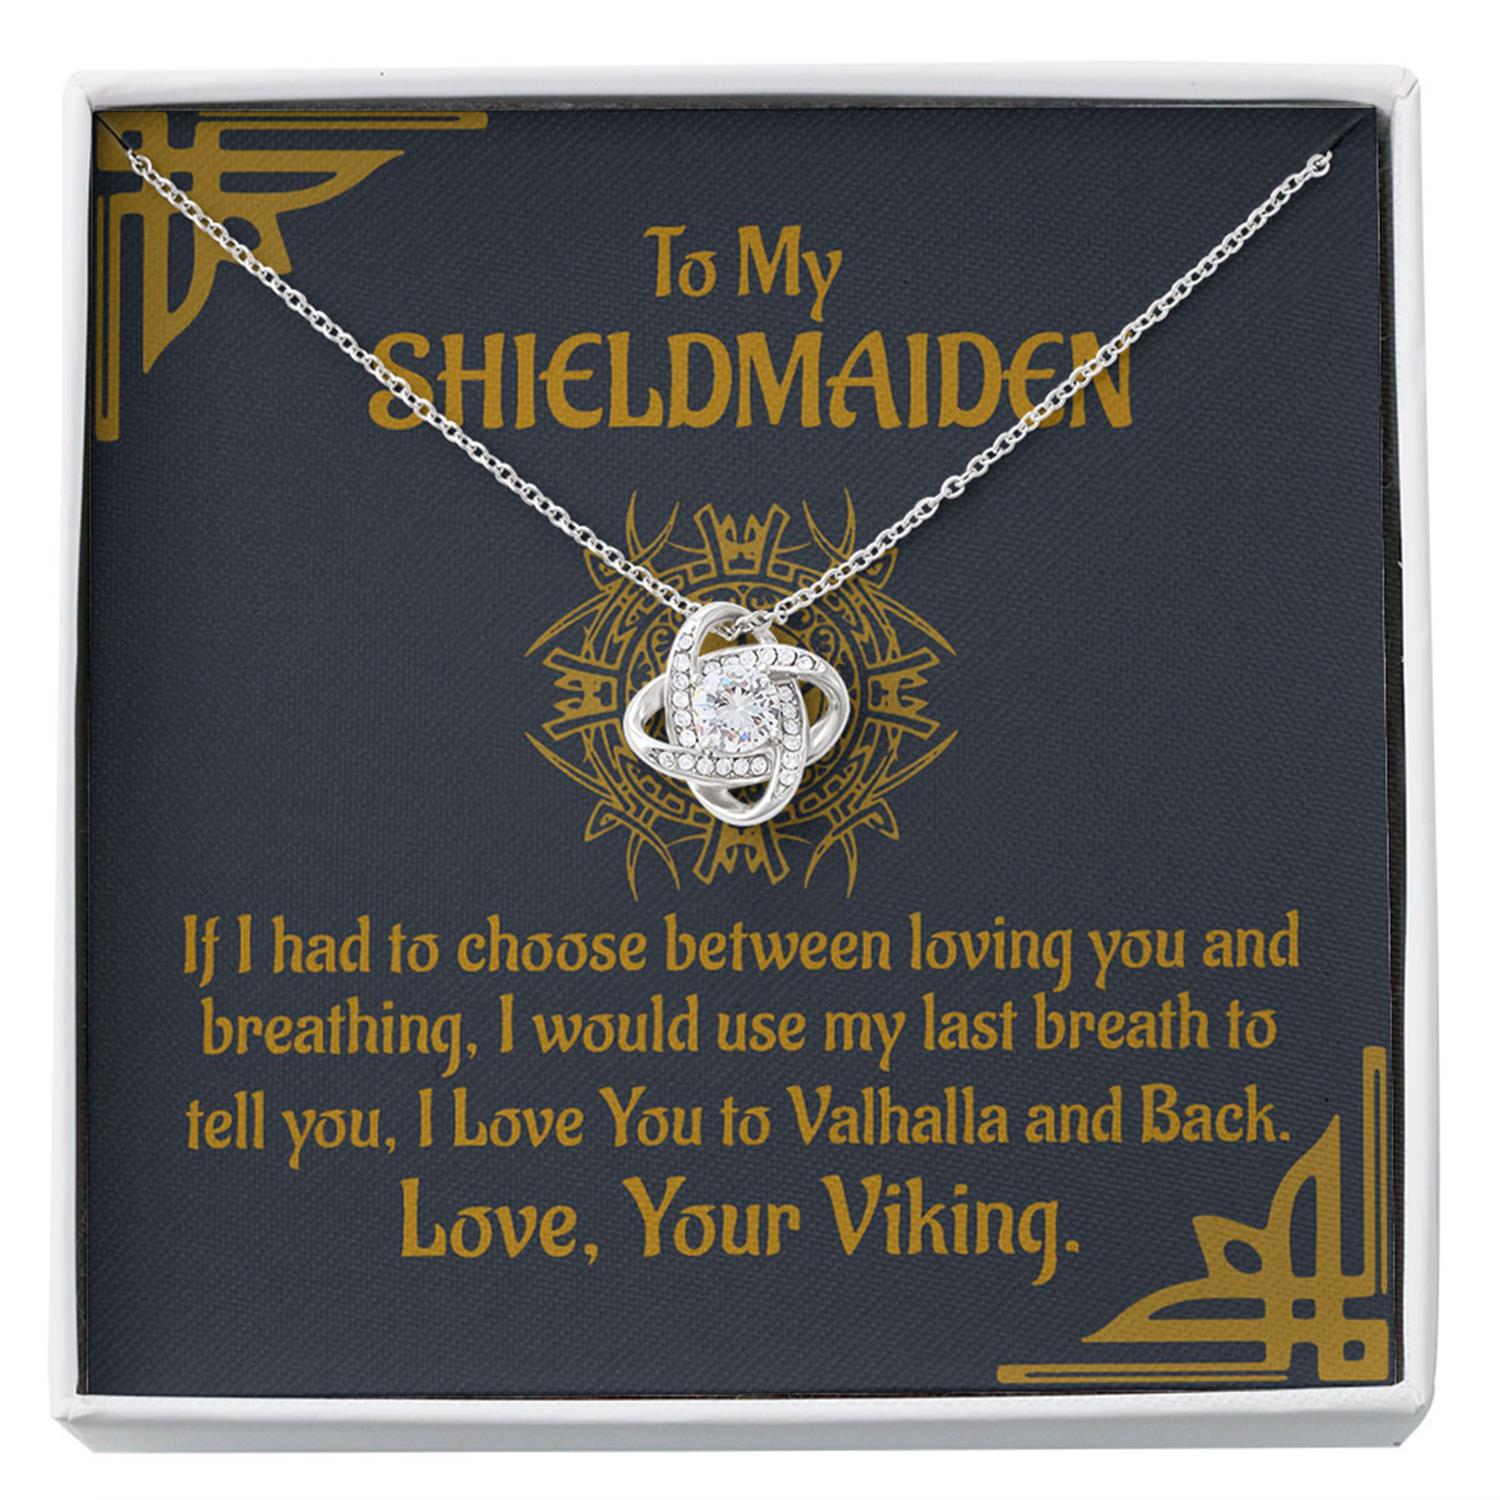 Girlfriend Necklace, Wife Necklace, My Shieldmaiden Necklace Breath Love You To Valhalla And Back Viking Alluring Custom Necklace